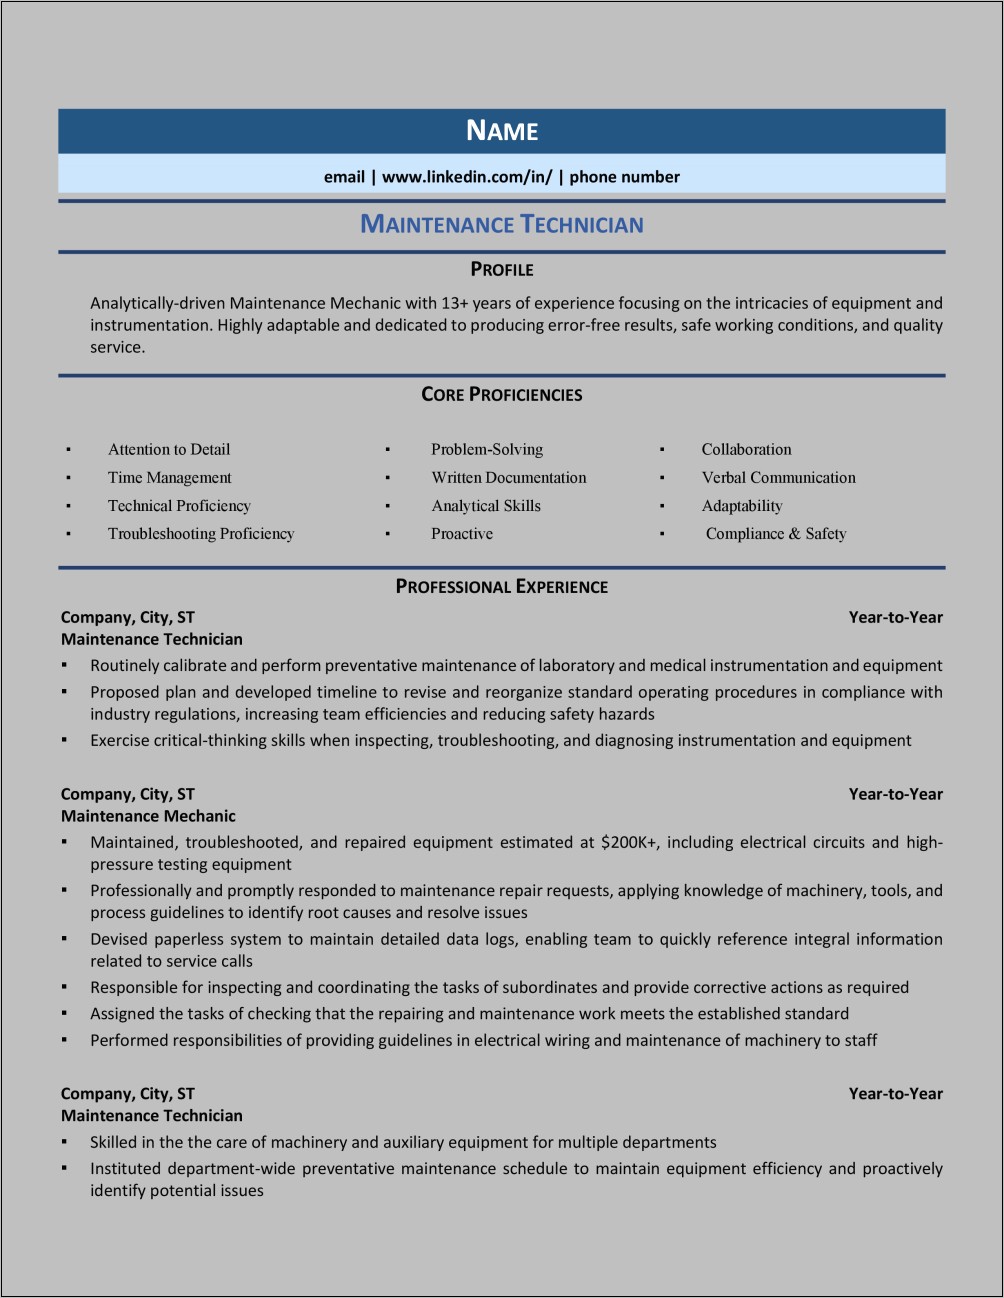 Resume Examples For Maintainenance Technican